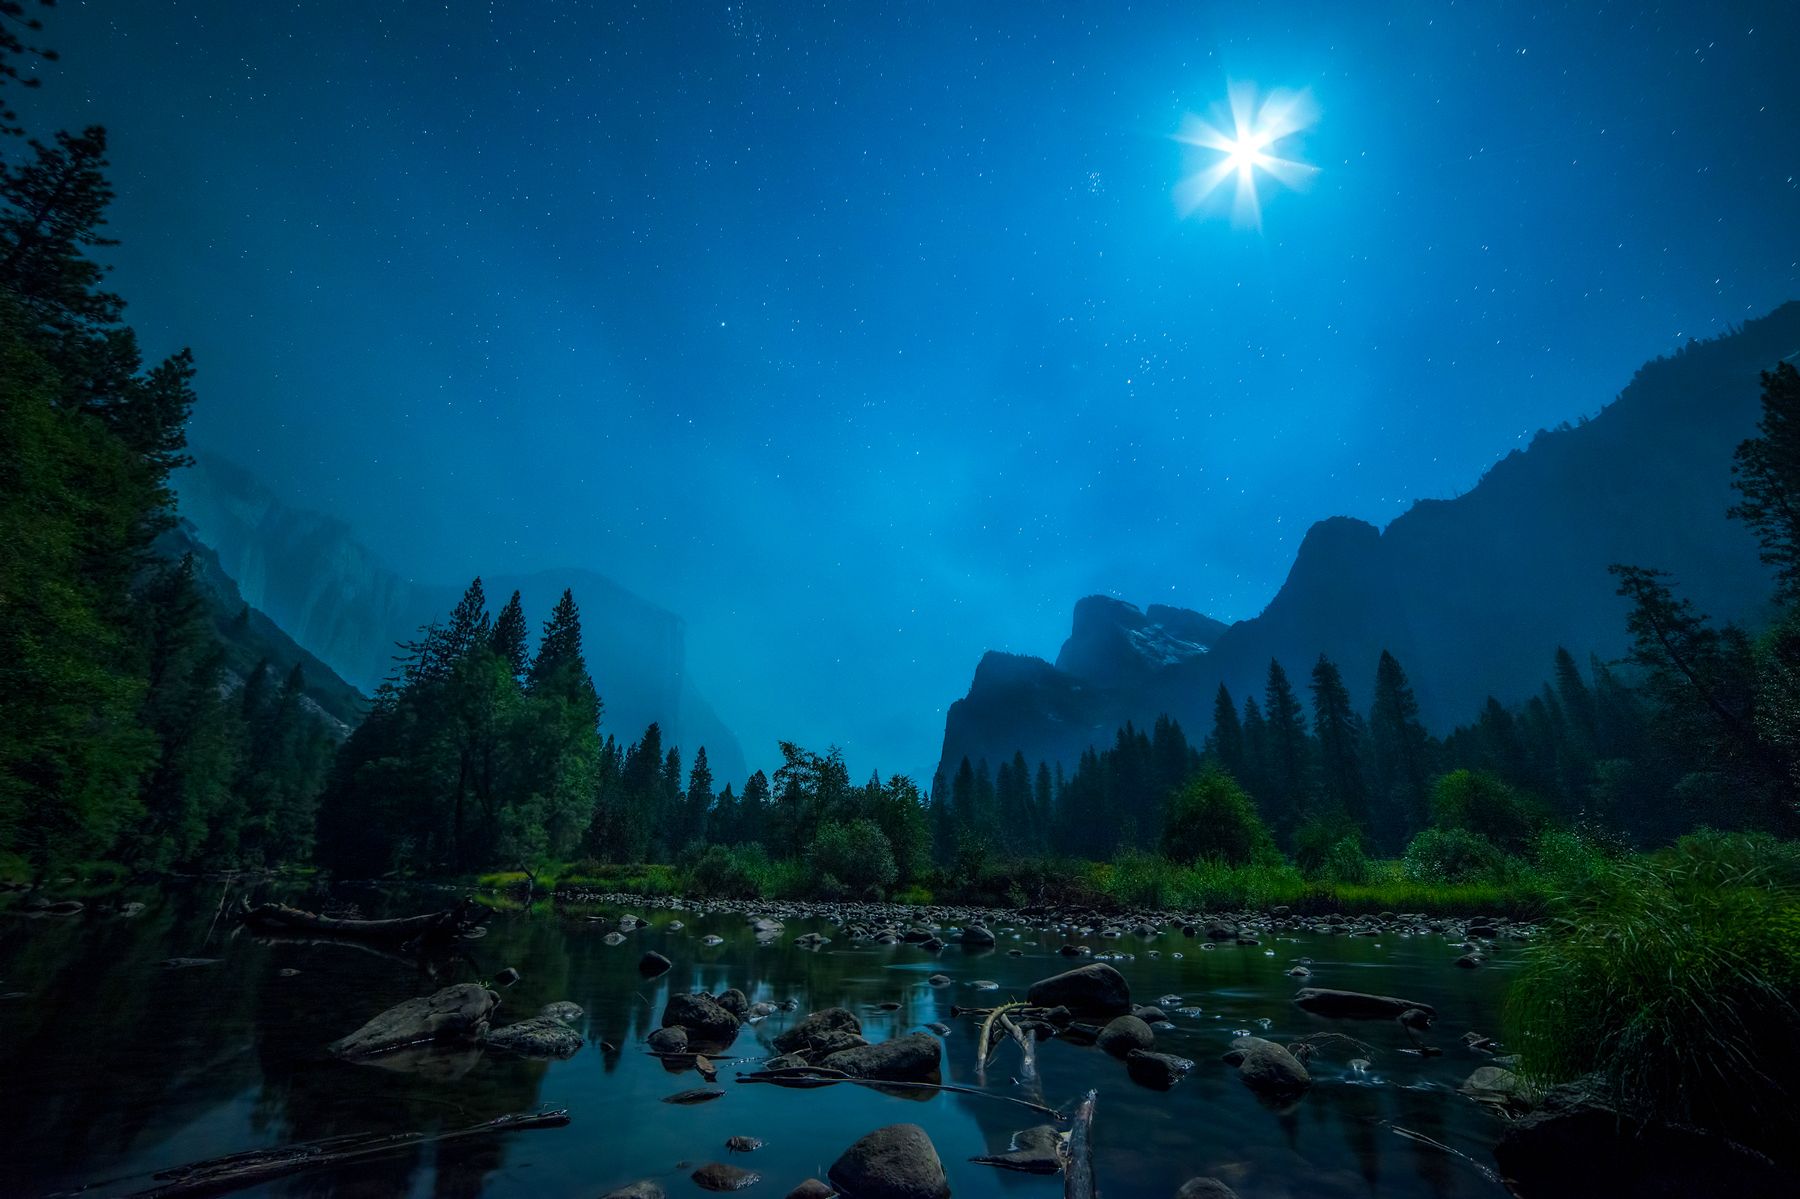  " gates of the valley or valley view  "yosemite in moonlight, 17th august 2014 